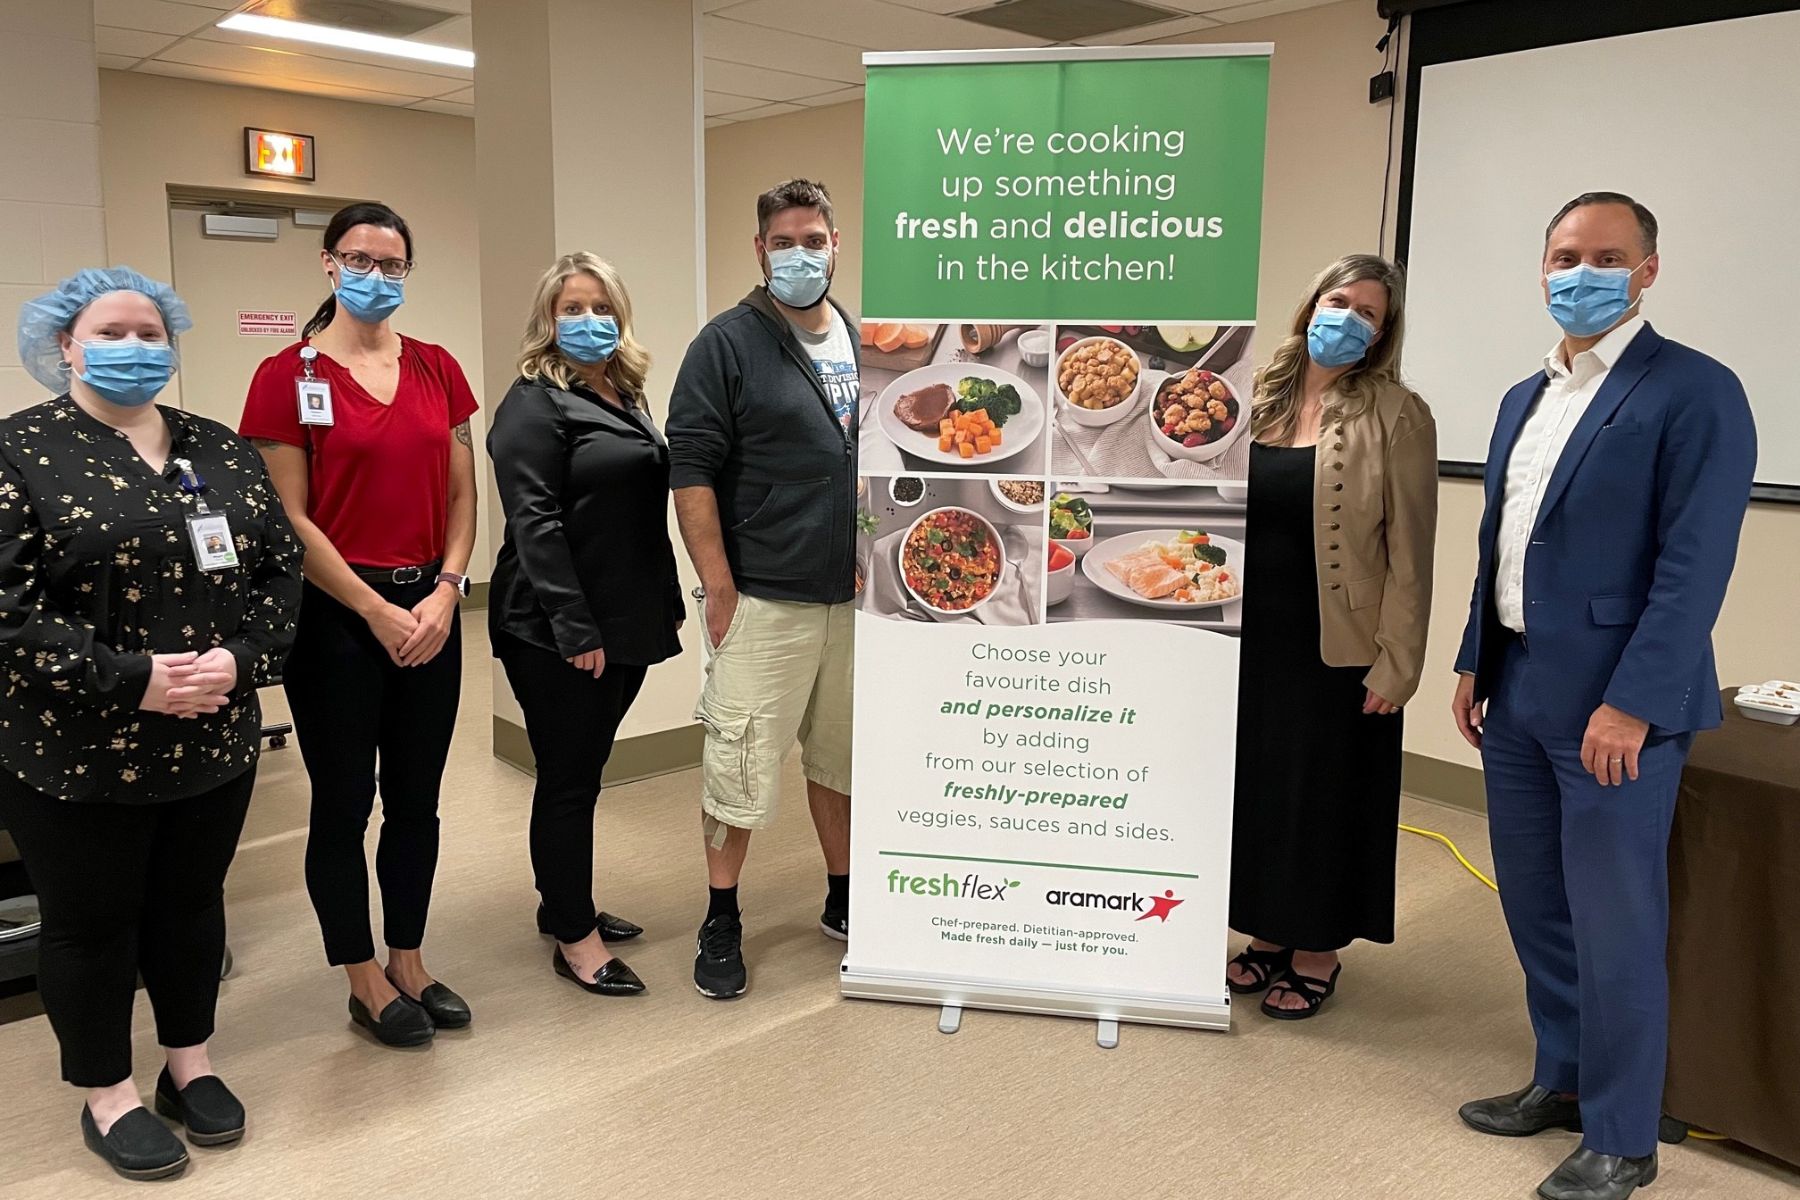 Six hospital workers gather around a a sign with four images of plated food. The sign reads We're Cooking Up something fresh and delicious in the kitchen